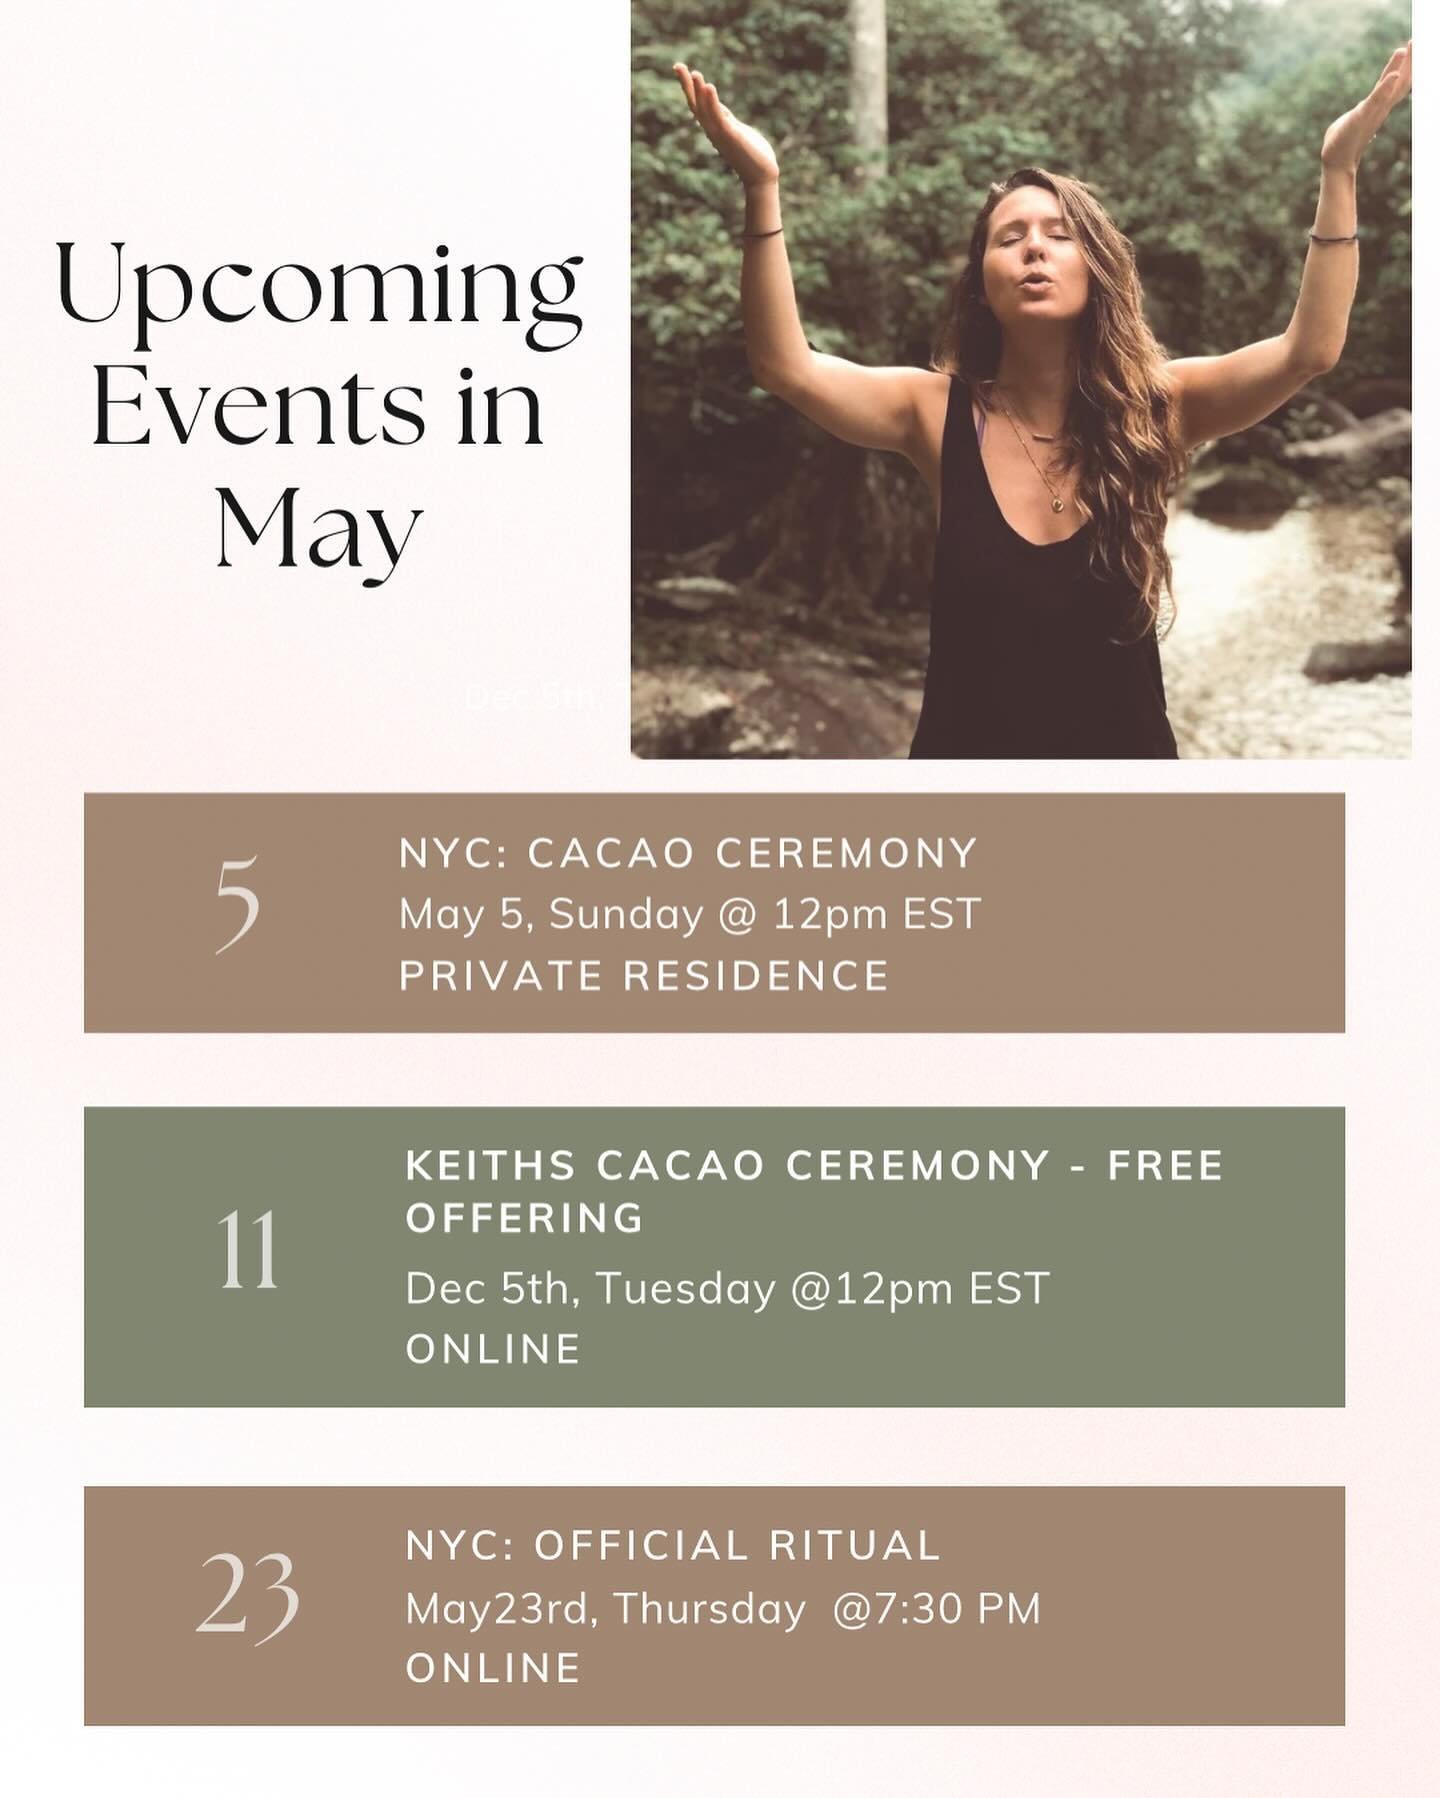 May event calendar 🙏 🌞 sign up links in bio - really feeling these refresh vibes! #nychealingevents #soundhealingnyc #energyhealingnyc